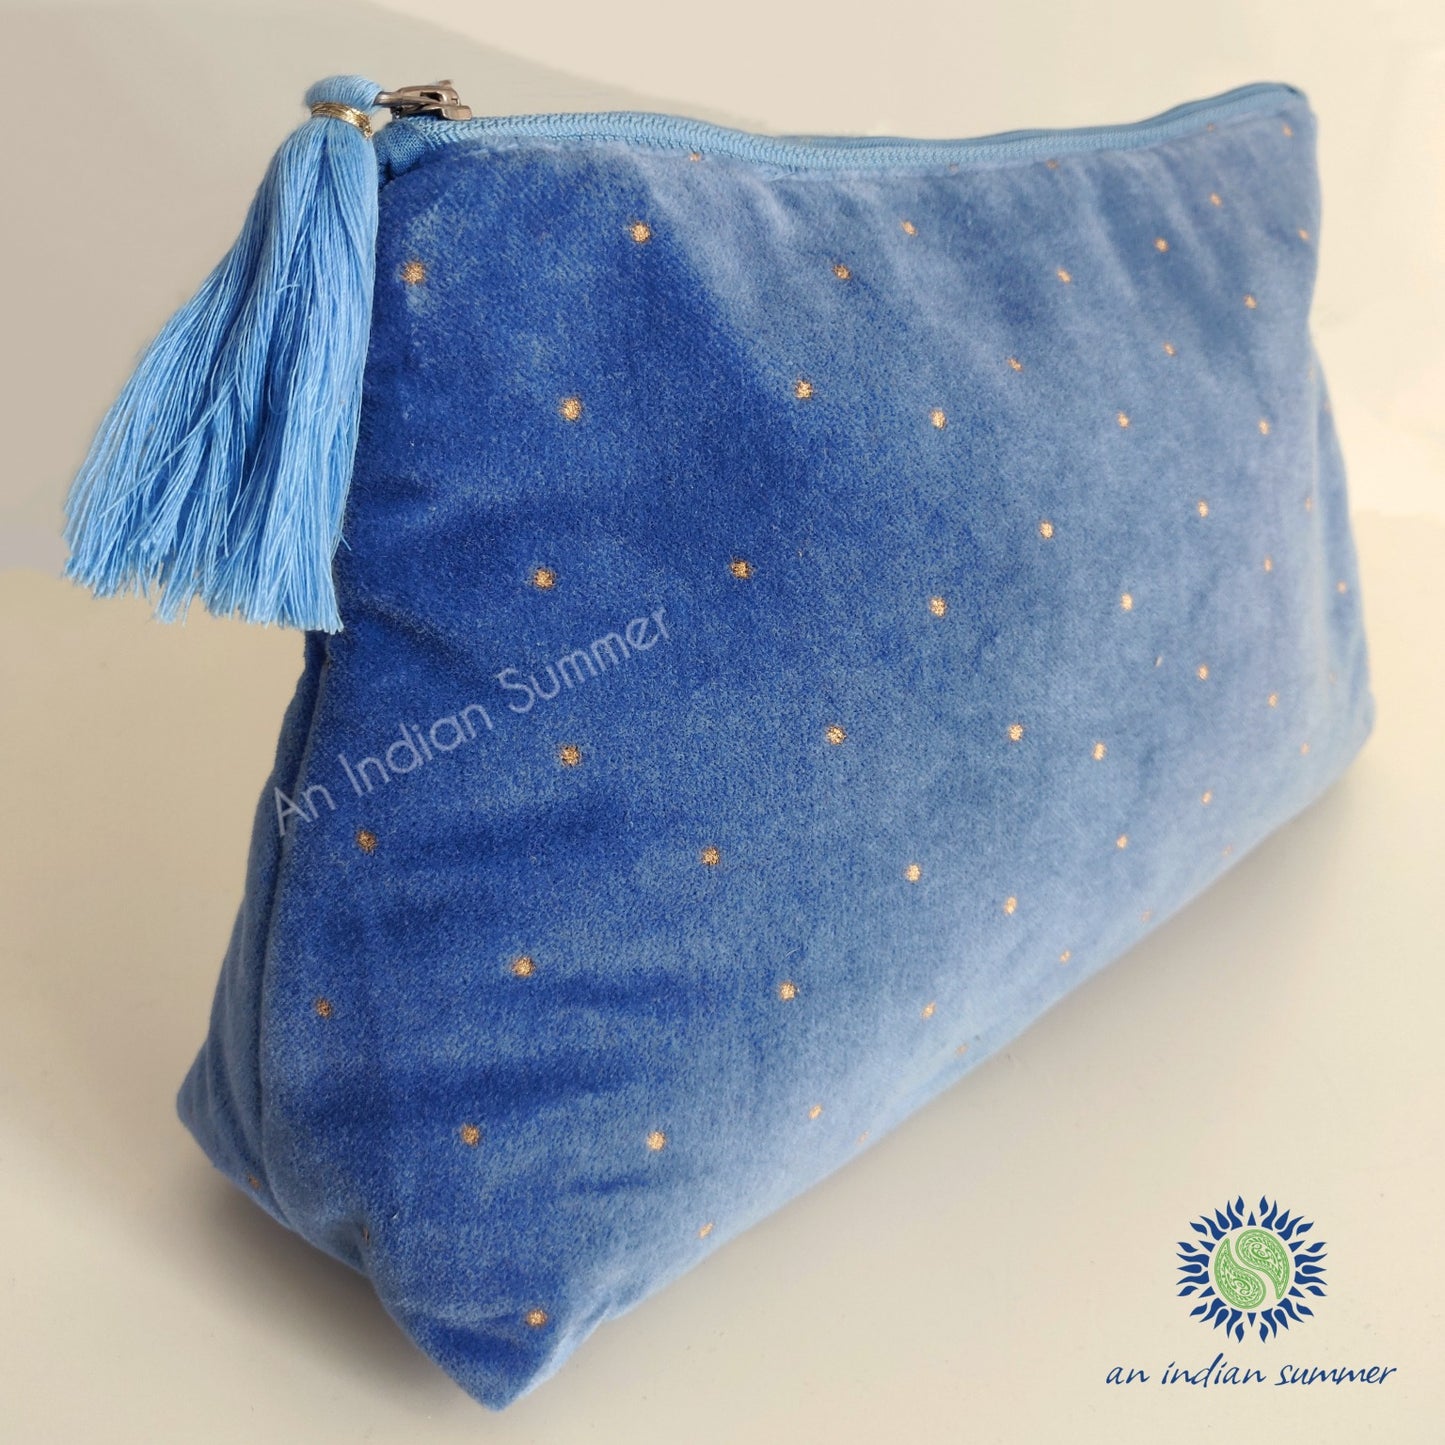 Velvet Travel Pouch | Powder Blue with Gold Stars | Cotton Velvet | An Indian Summer | Seasonless Timeless Sustainable Ethical Authentic Artisan Conscious Clothing Lifestyle Brand